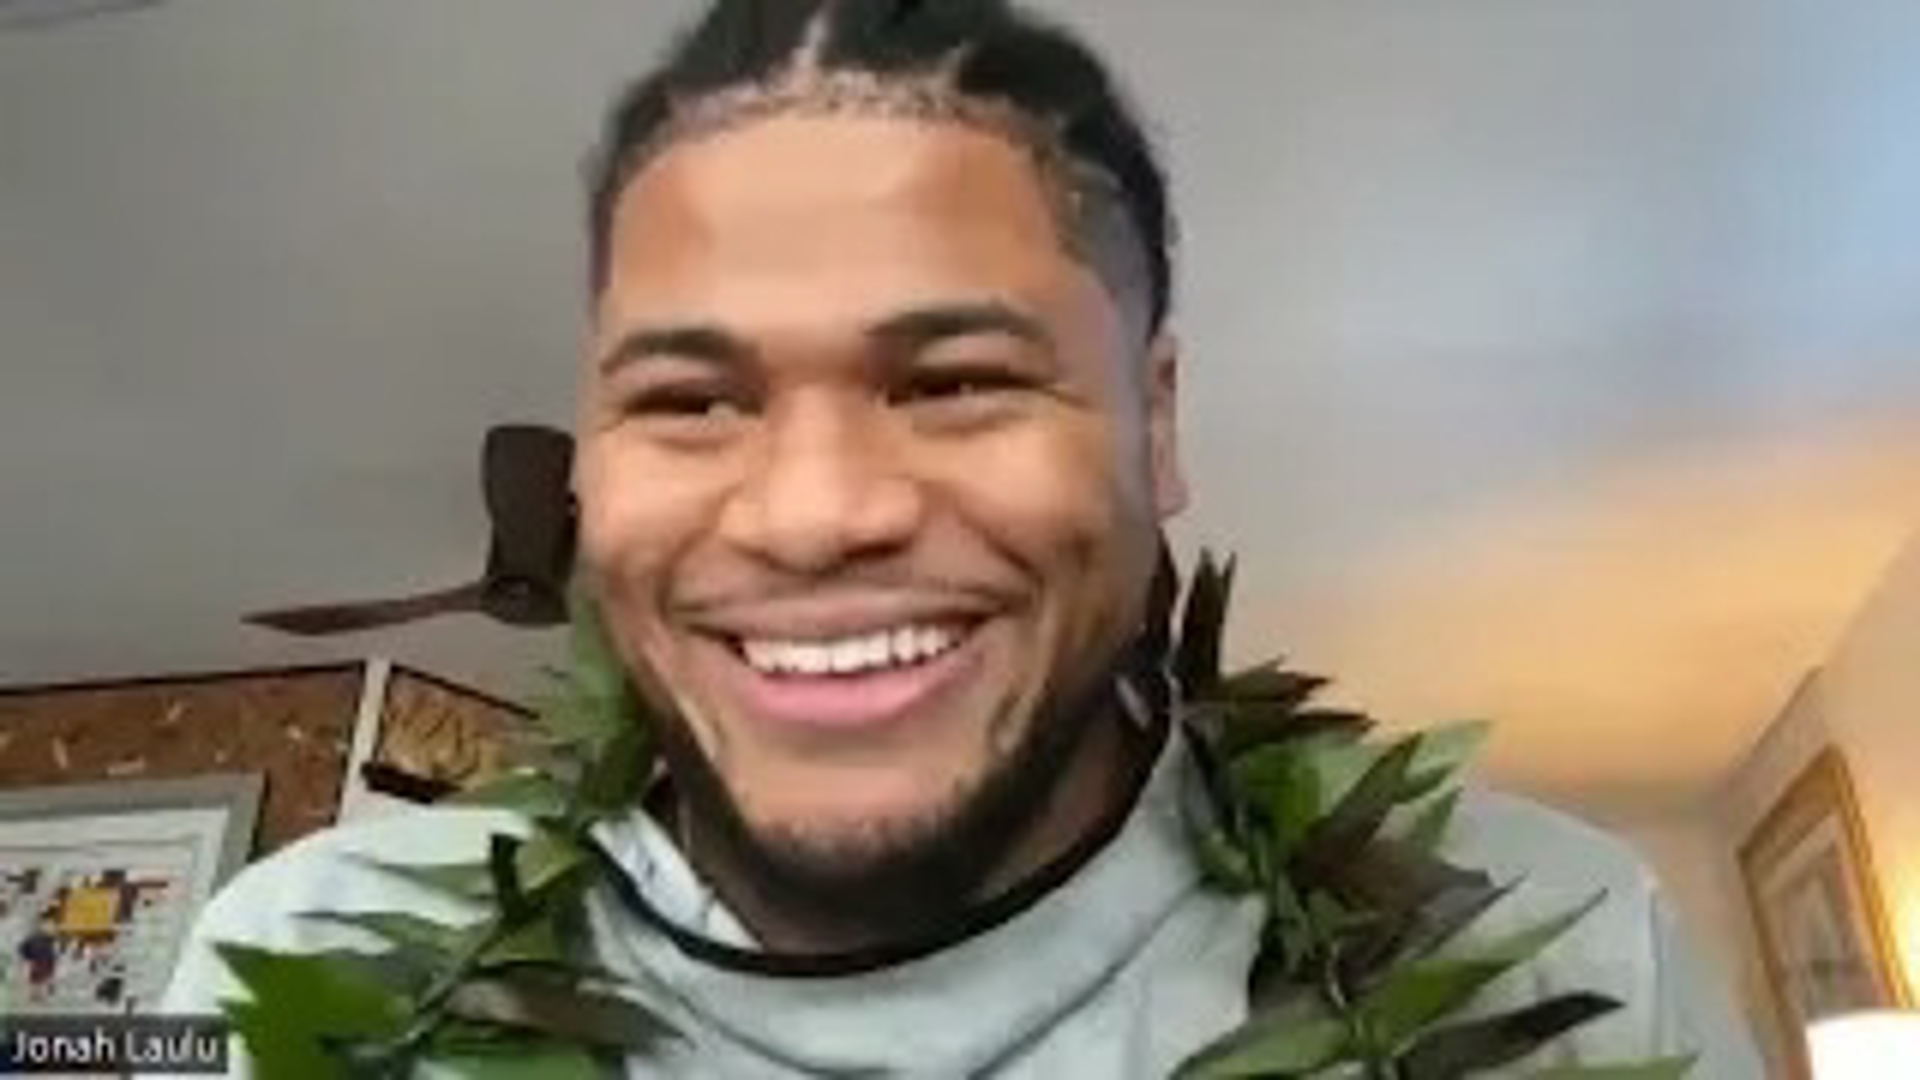 The Indianapolis Colts used a seventh-round pick on Oklahoma defensive tackle Jonah Laulu, who detailed his interesting journey from Hawaii.